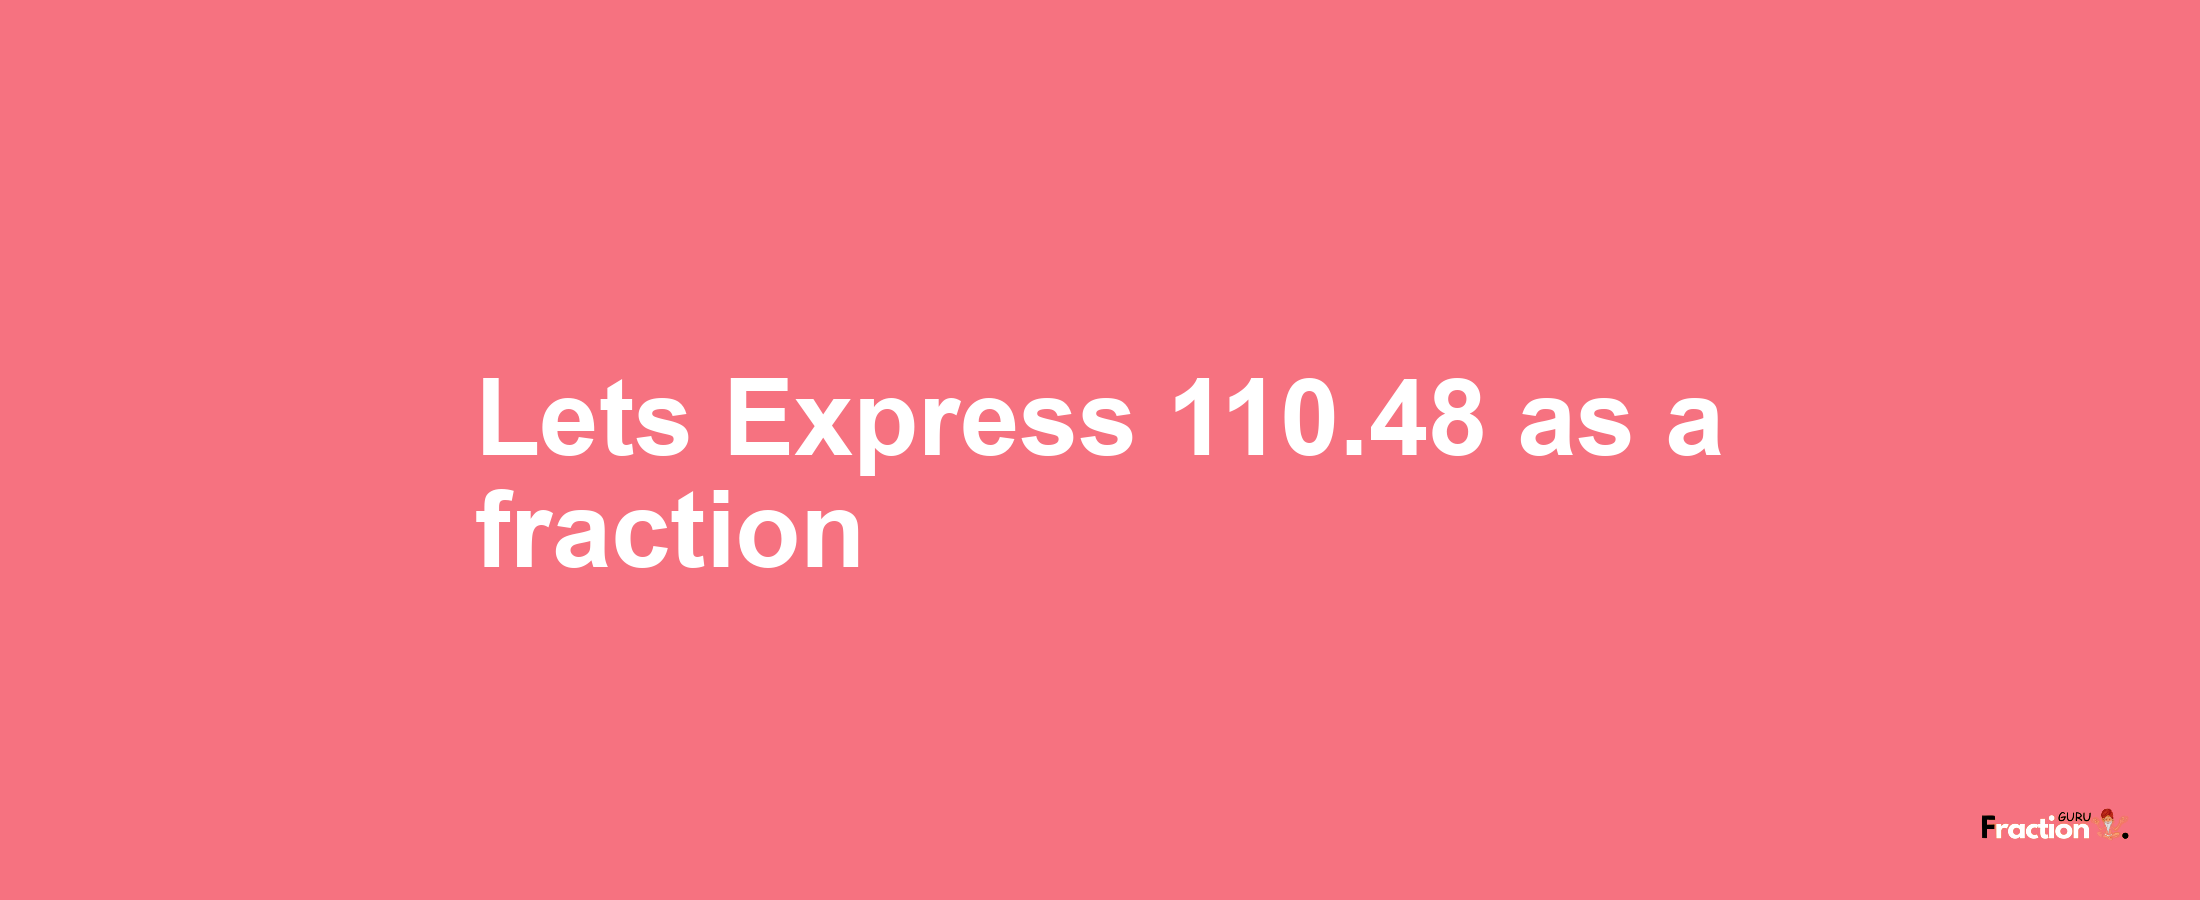 Lets Express 110.48 as afraction